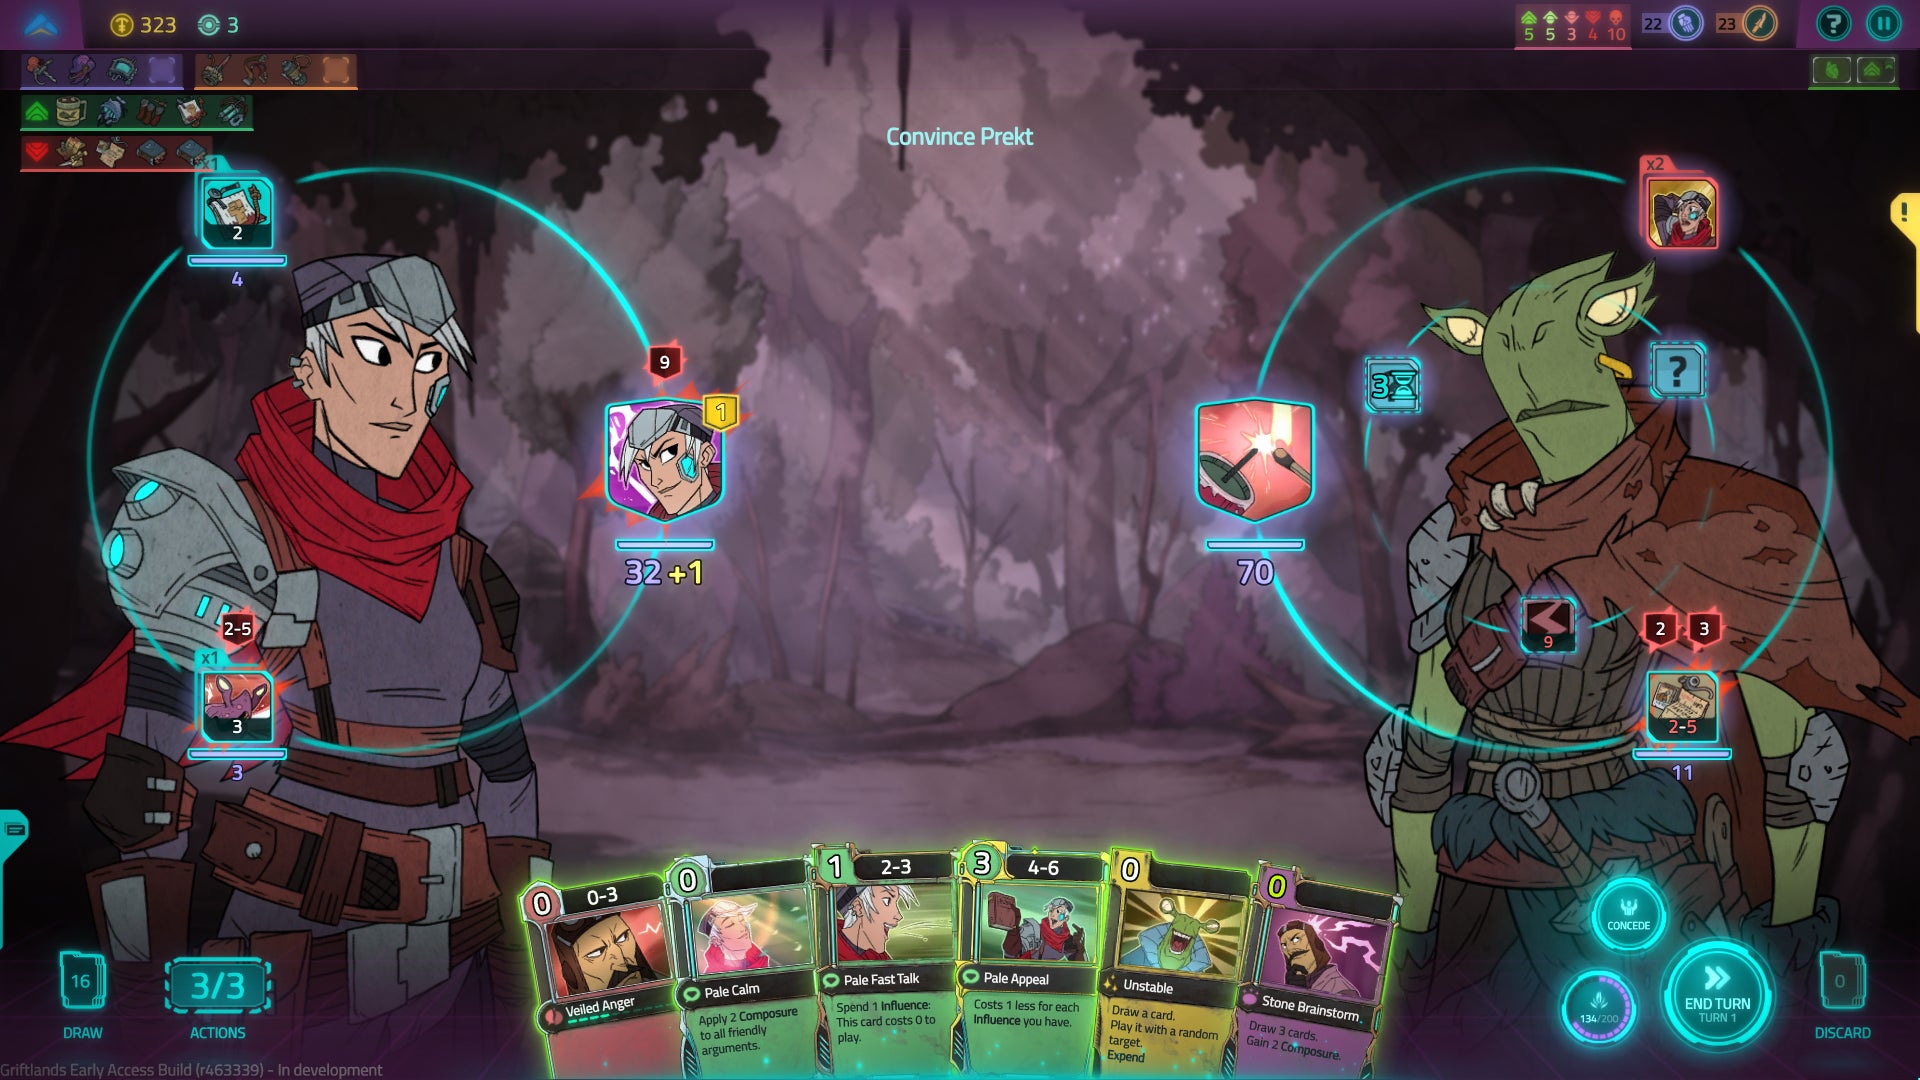 A Griftlands screenshot of a negotiation "battle" between the player character and a character called Prekt.